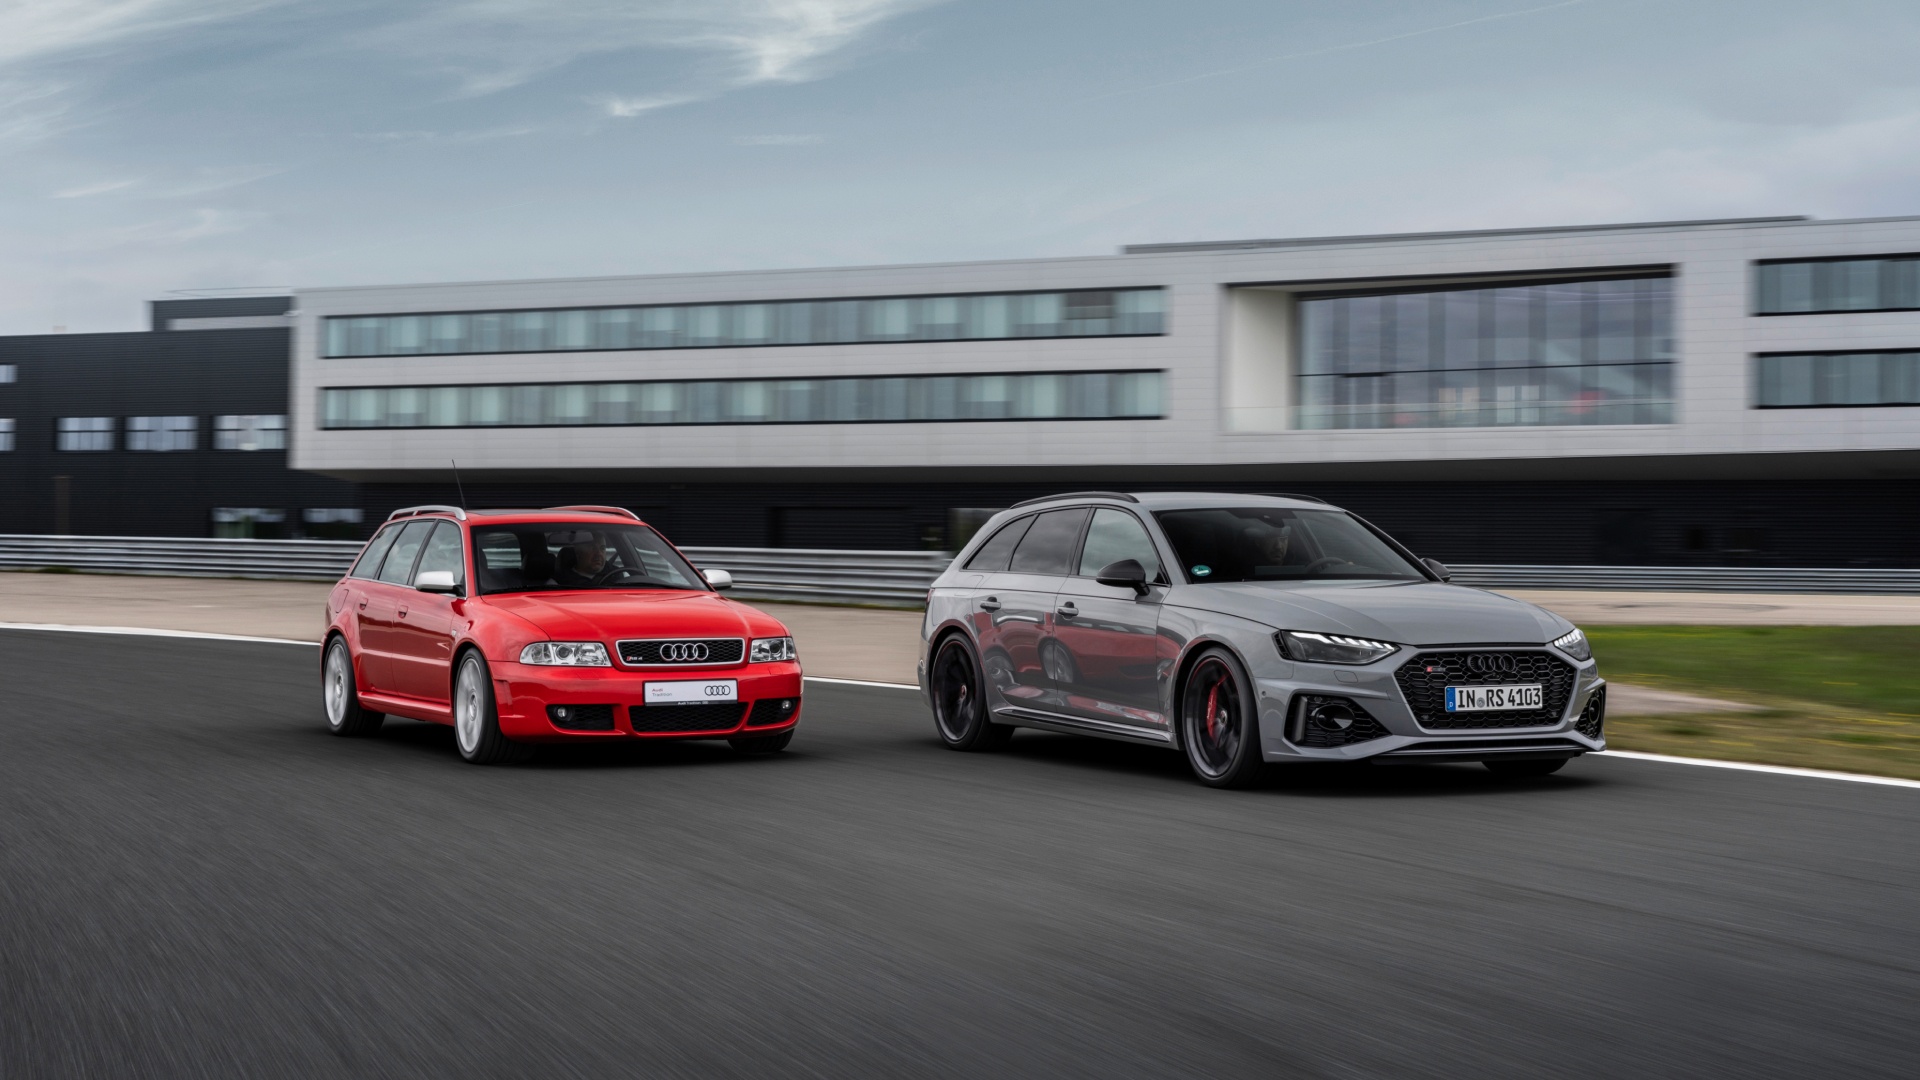 An Audi RS 4 (B5) and a current Audi RS model driving on a racetrack.